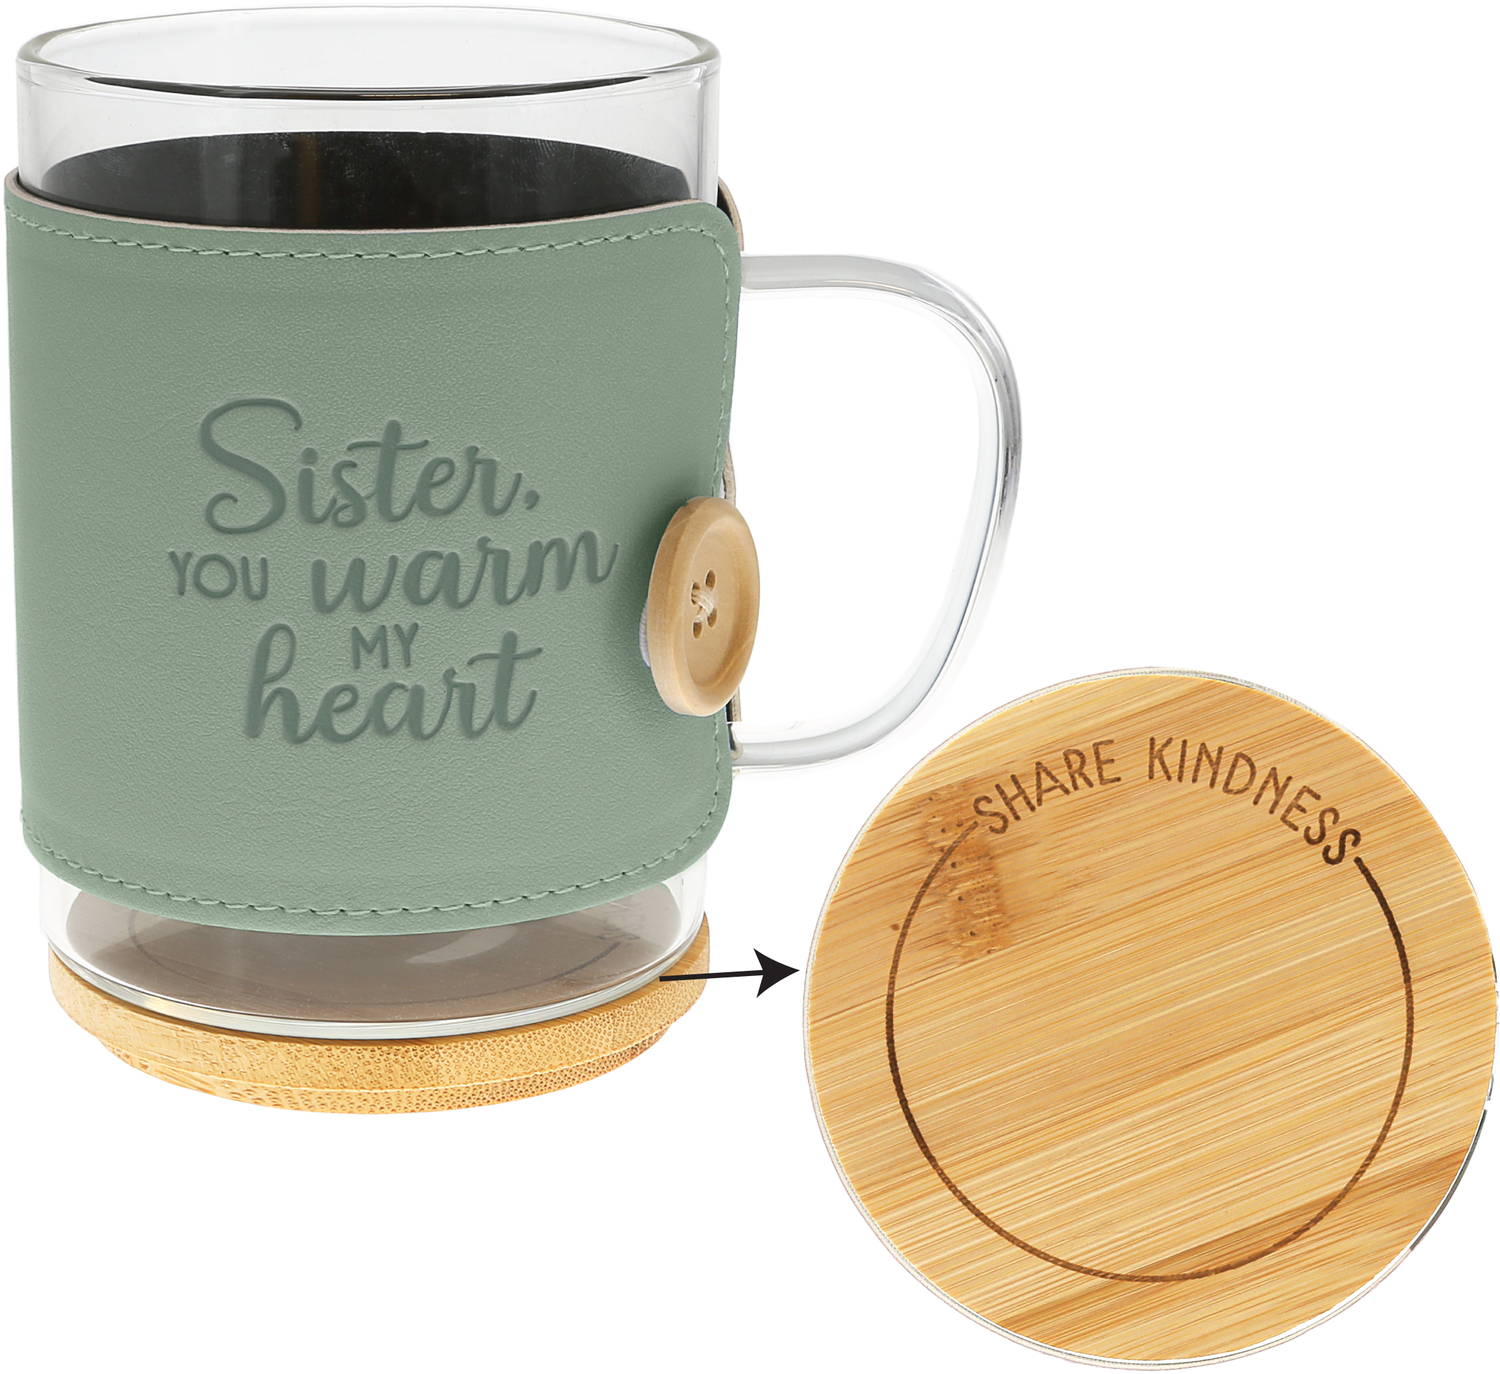 Sister by Wrapped in Kindness - Sister - 16 oz Wrapped Glass Mug with Coaster Lid